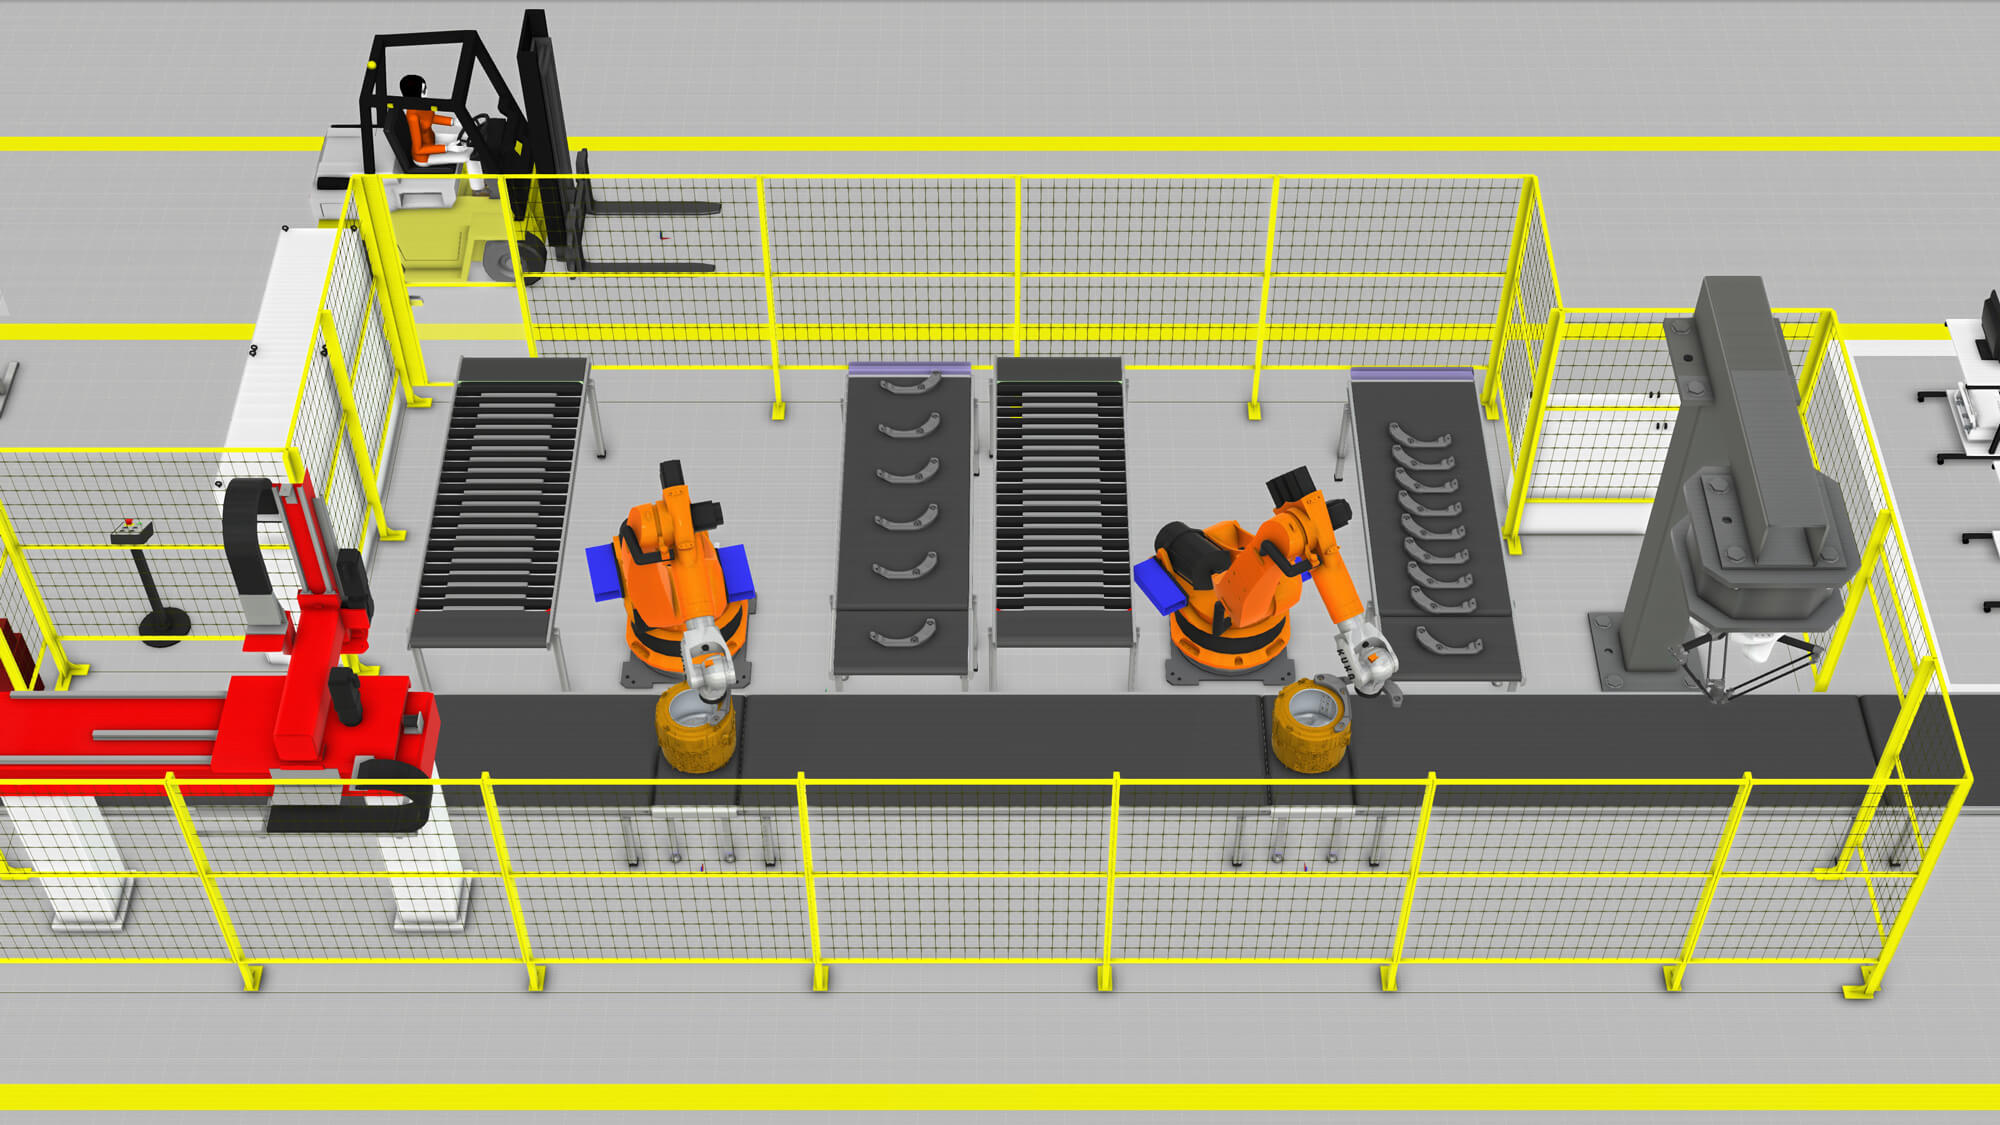 Simulation of a Midea tub assembly line